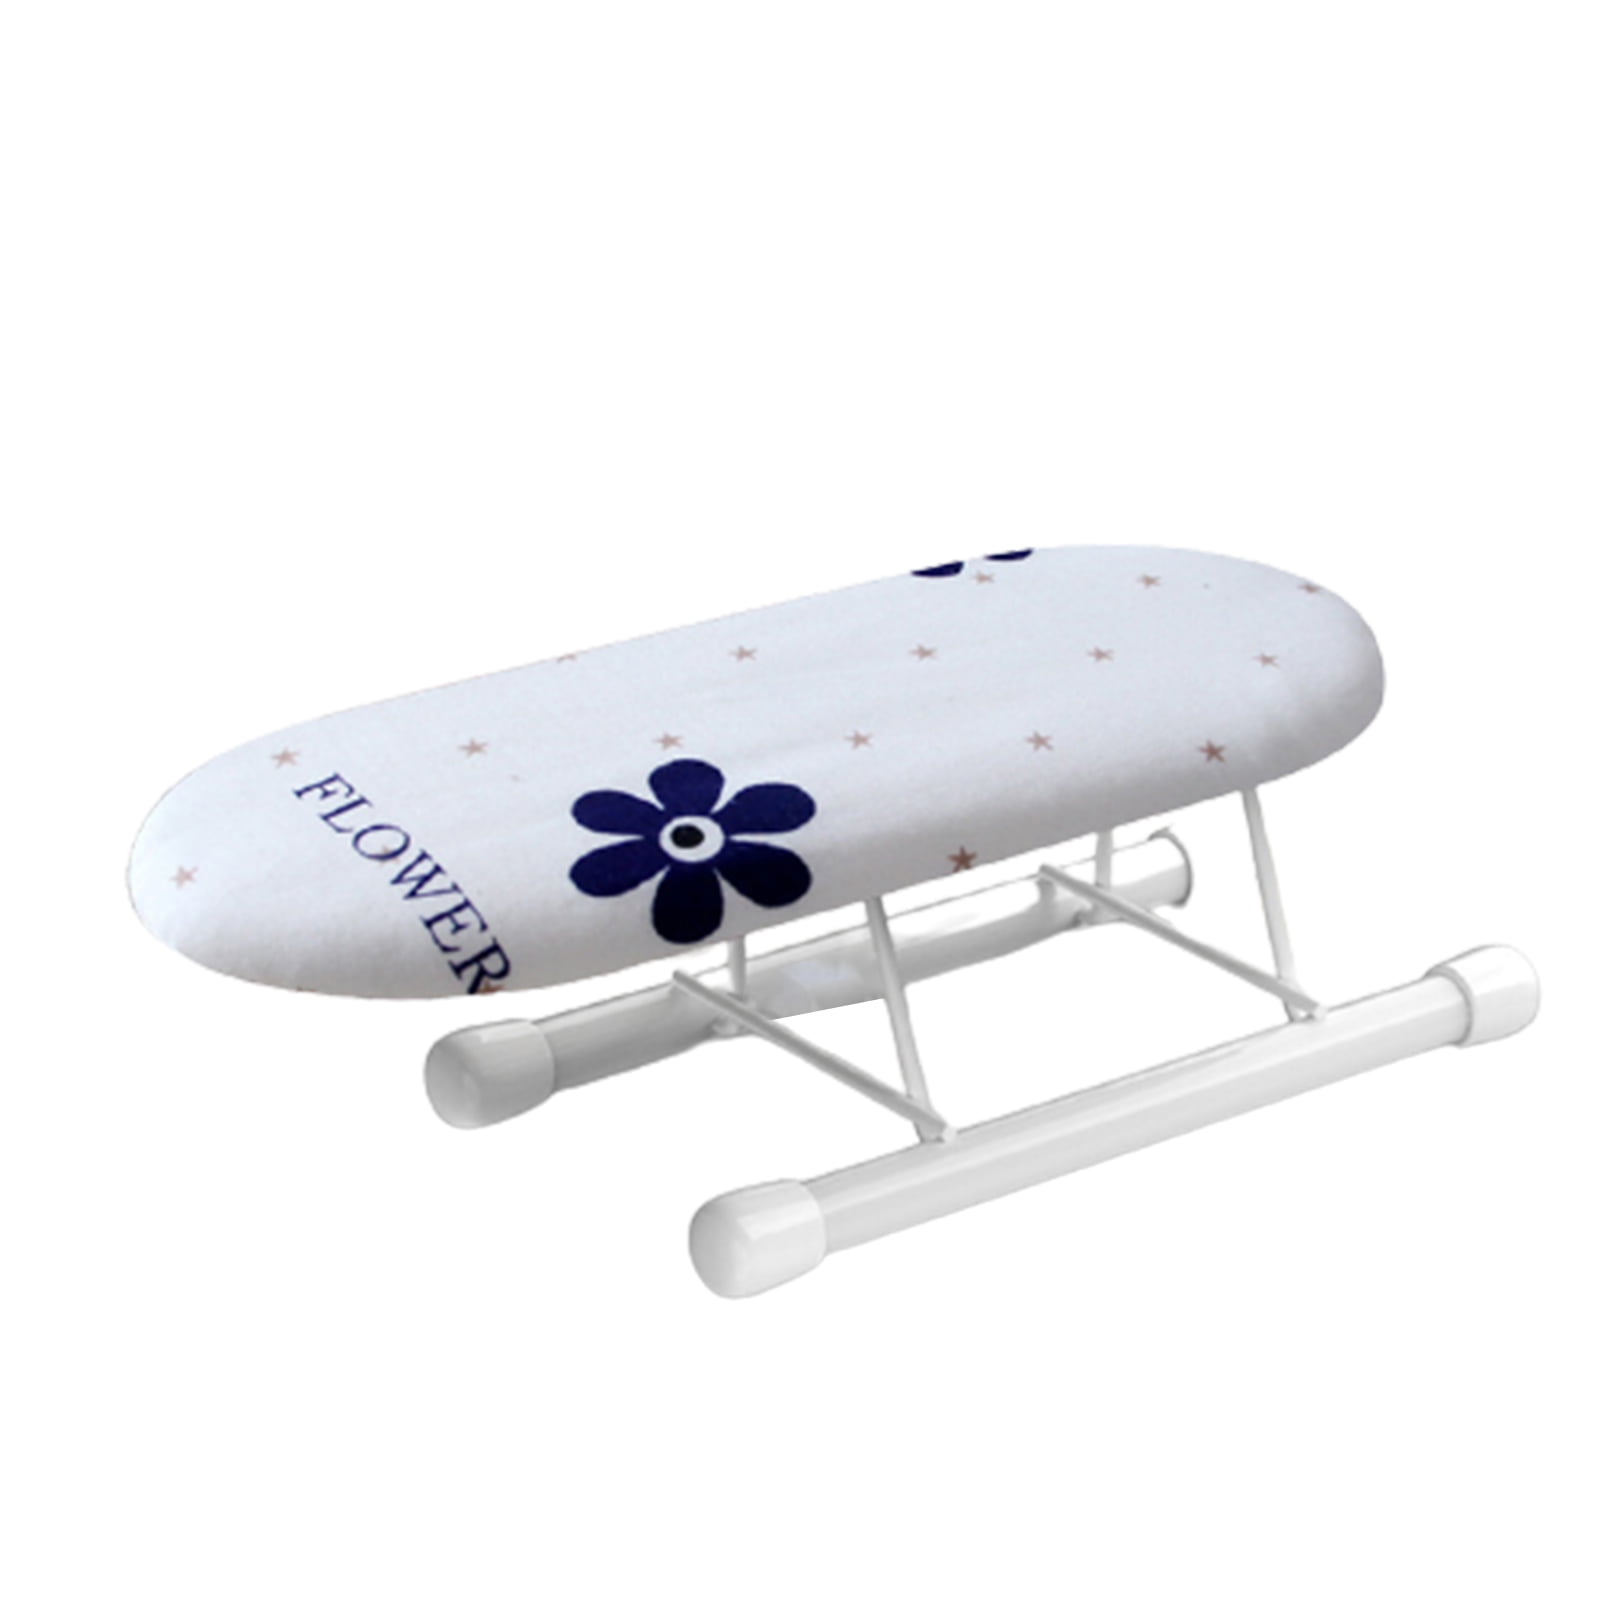 Brabantia 1pc Countertop Ironing Board Tabletop Compact Rest 